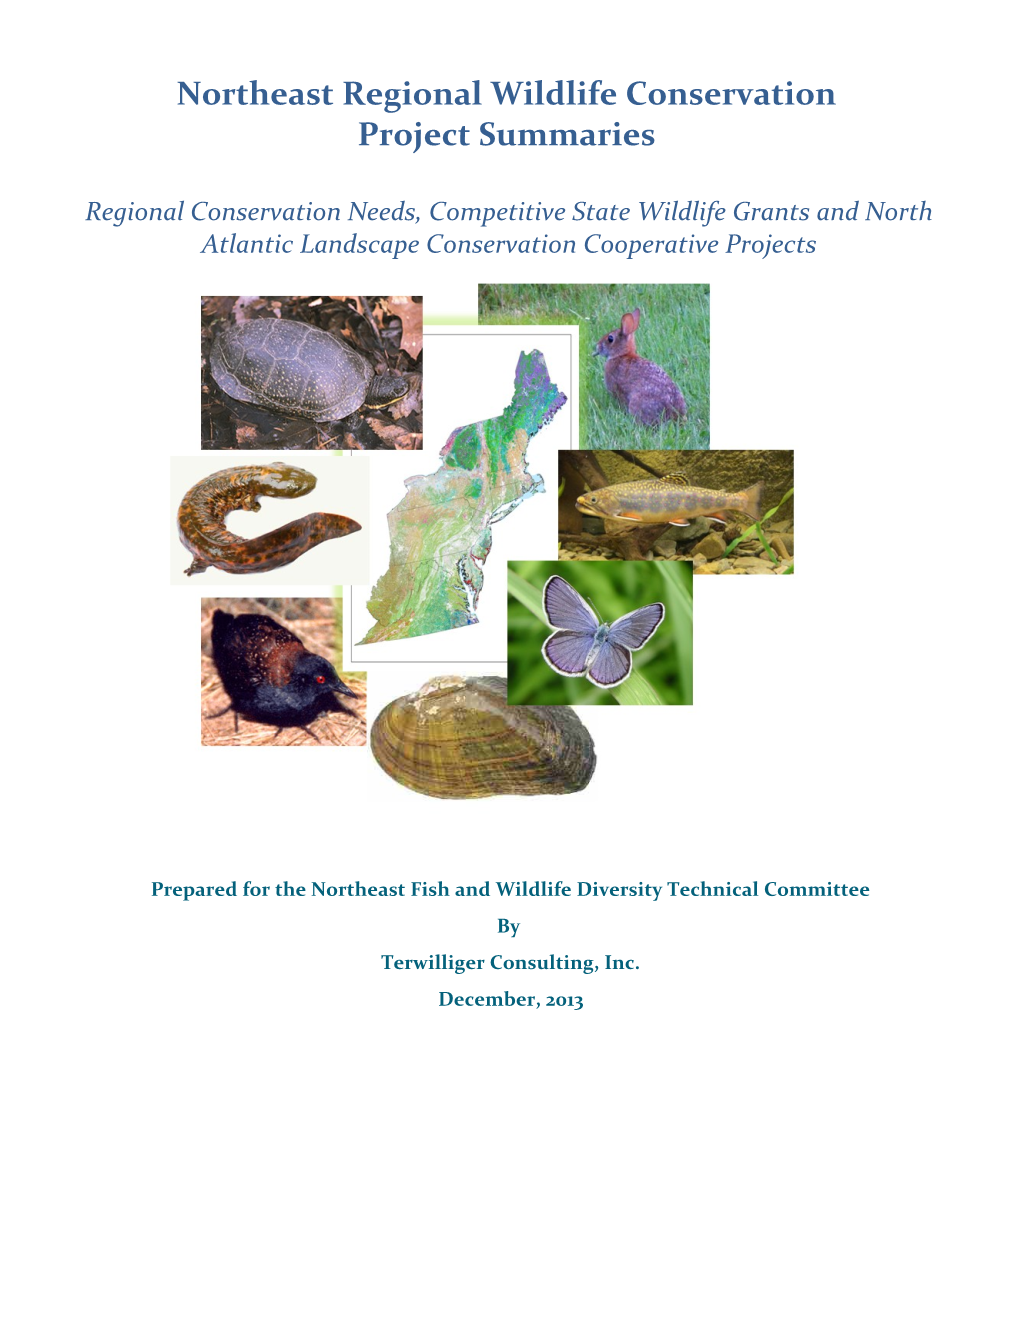 Regional Conservation Needs (RCN) Projects Summary Report